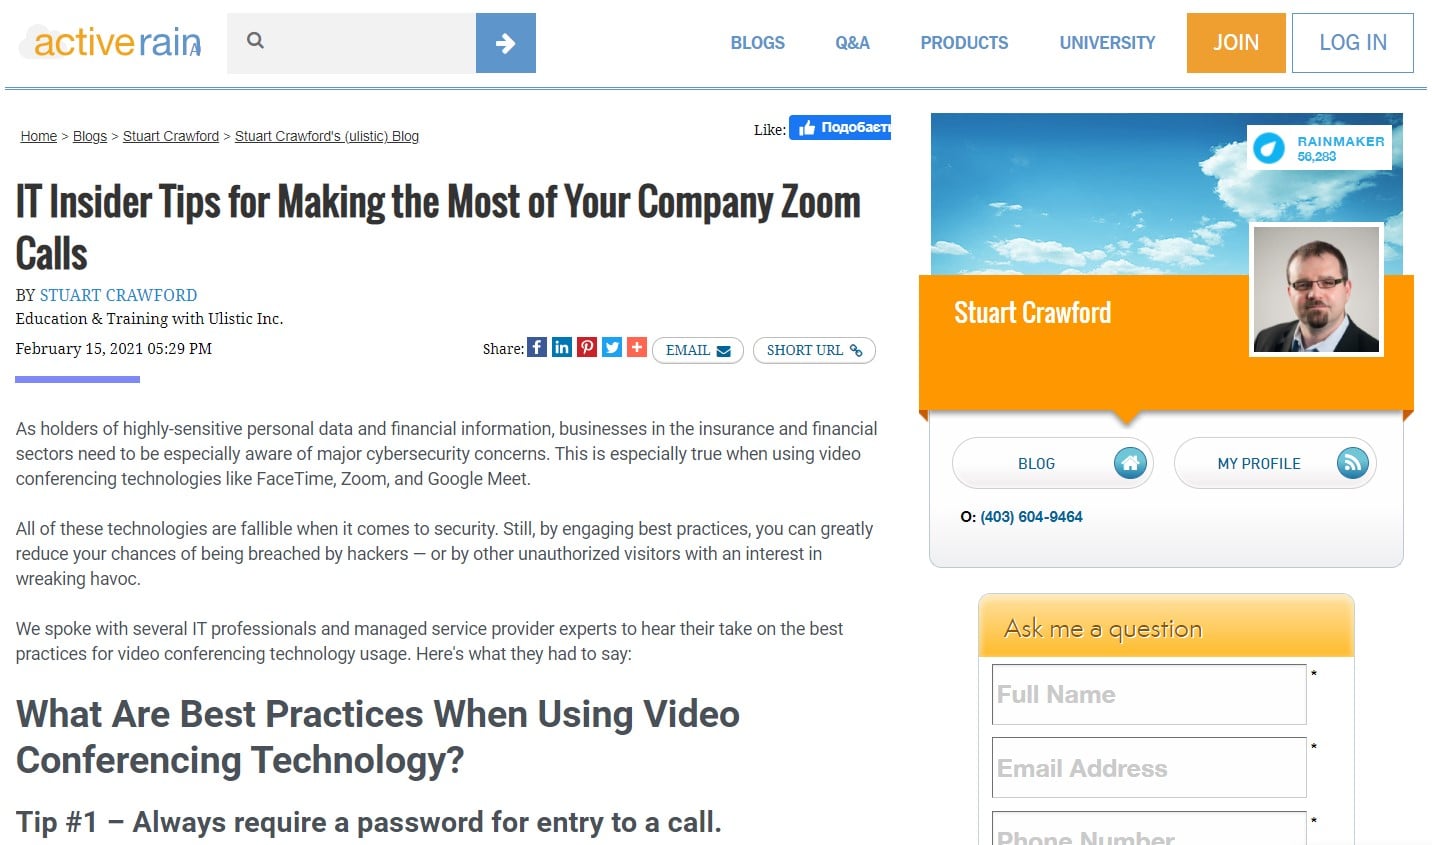 IT Insider Tips for Making the Most of Your Company Zoom Calls